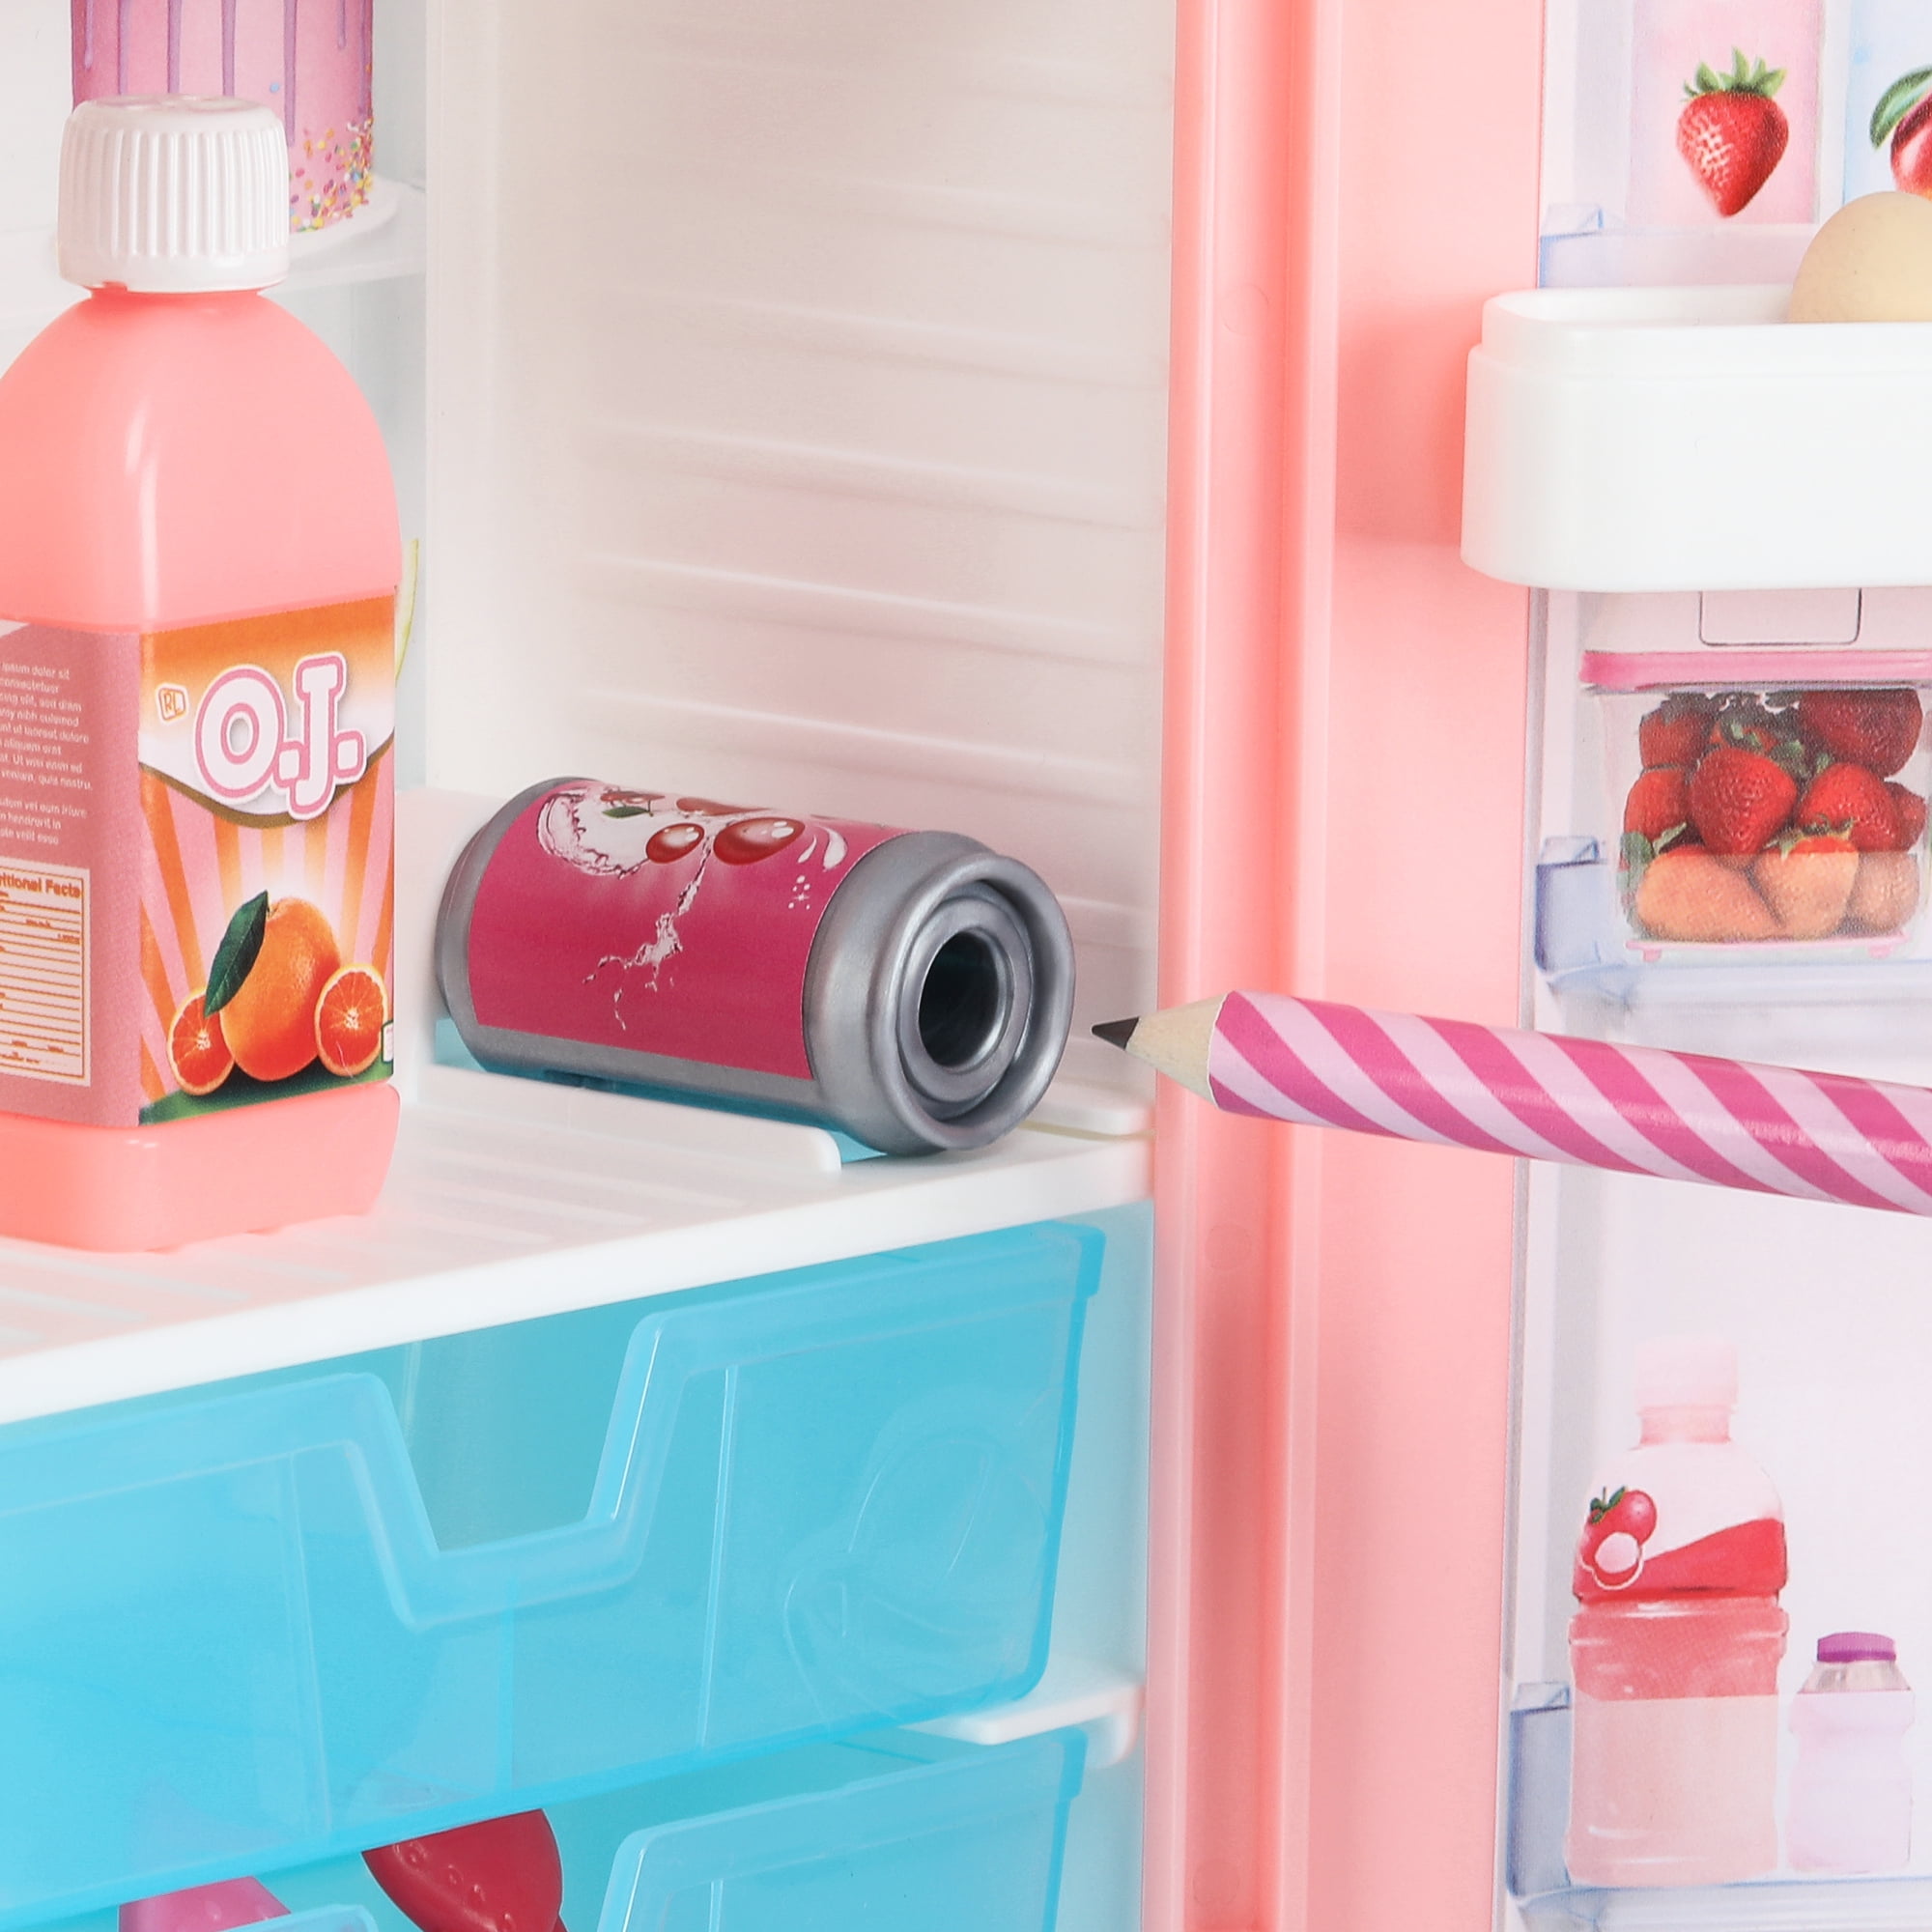 Like A Real Fridge – Just Micro! Discover the NEW Desktop Caddy in the Real  Littles range this season! This Mini Fridge is Super Cool!…